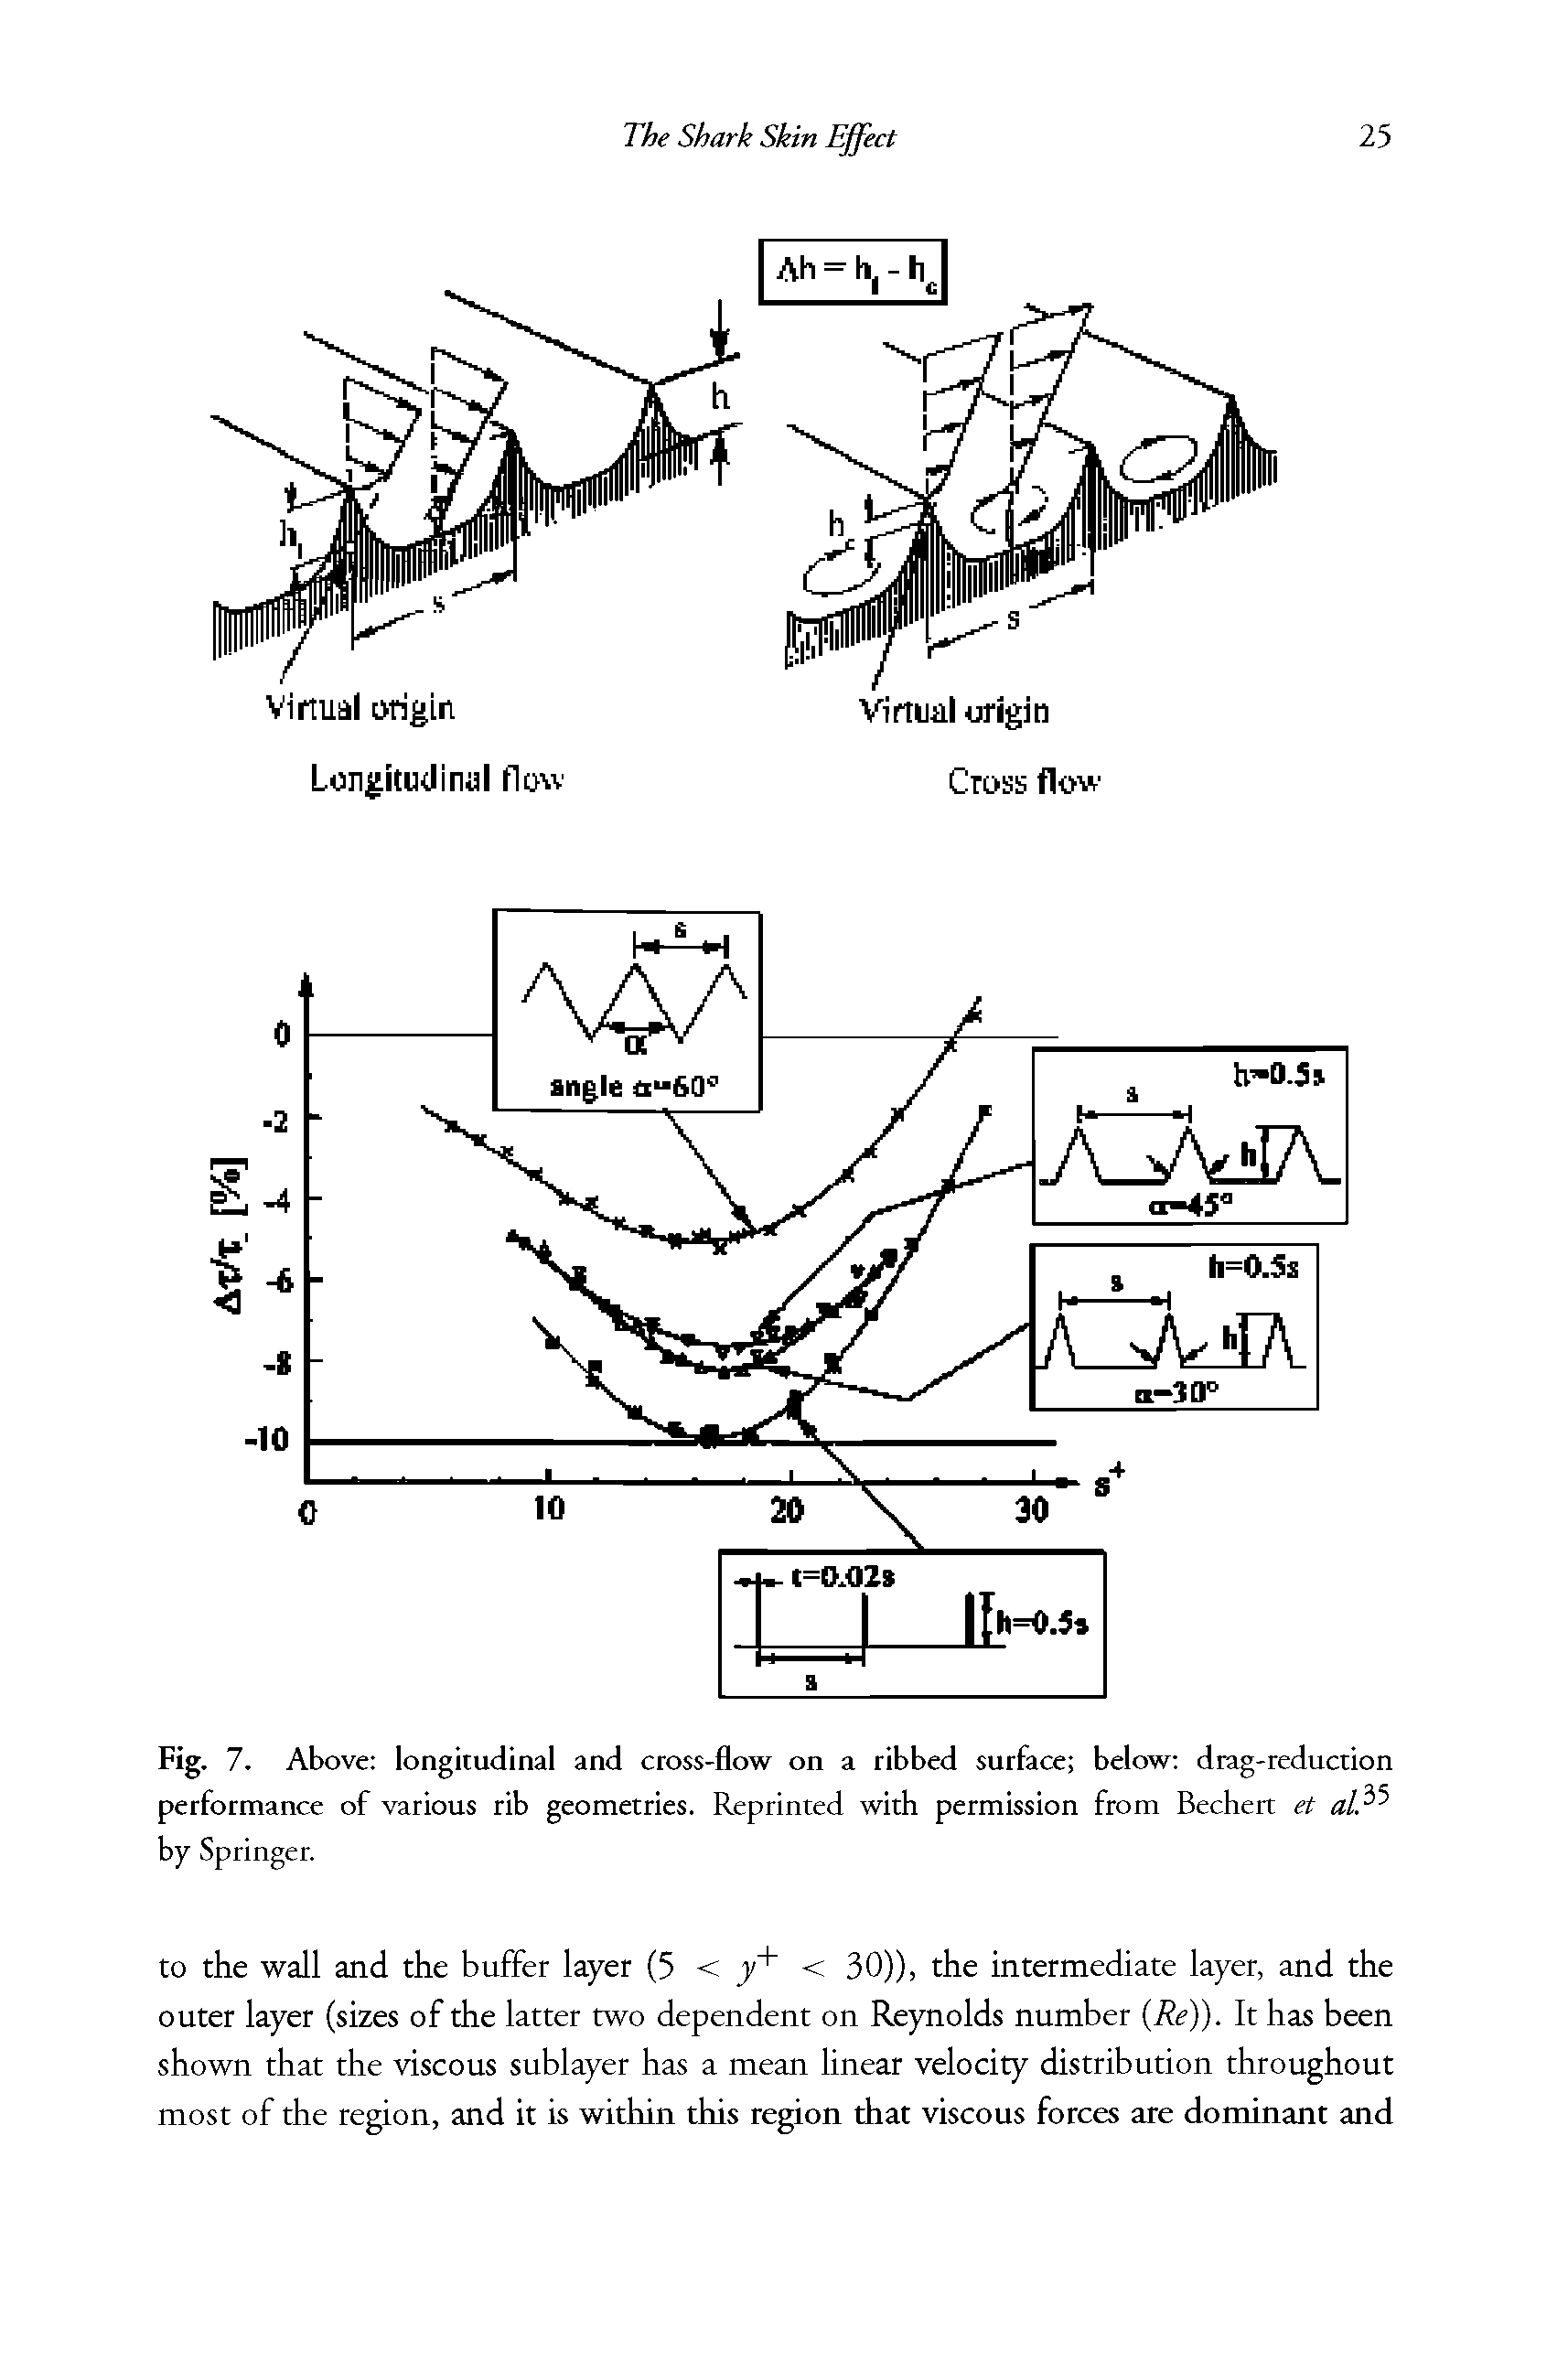 Fig. 7. Above longitudinal and cross-flow on a ribbed surface below drag-reduction performance of various rib geometries. Reprinted with permission from Bechert et al by Springer.